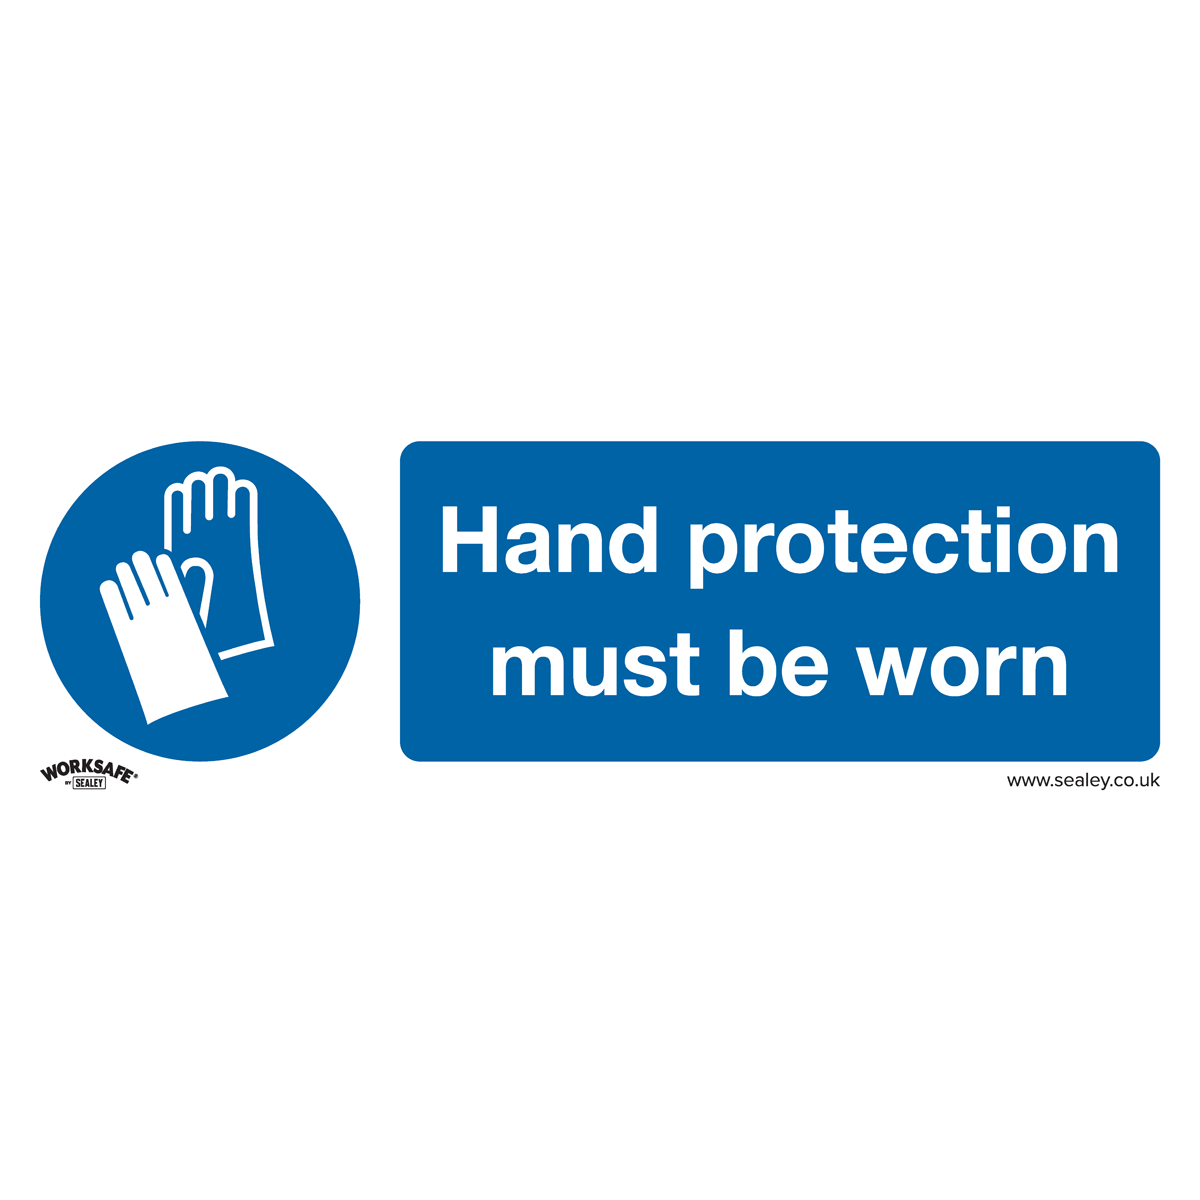 Mandatory Safety Sign - Hand Protection Must Be Worn - Rigid Plastic - SS6P1 - Farming Parts